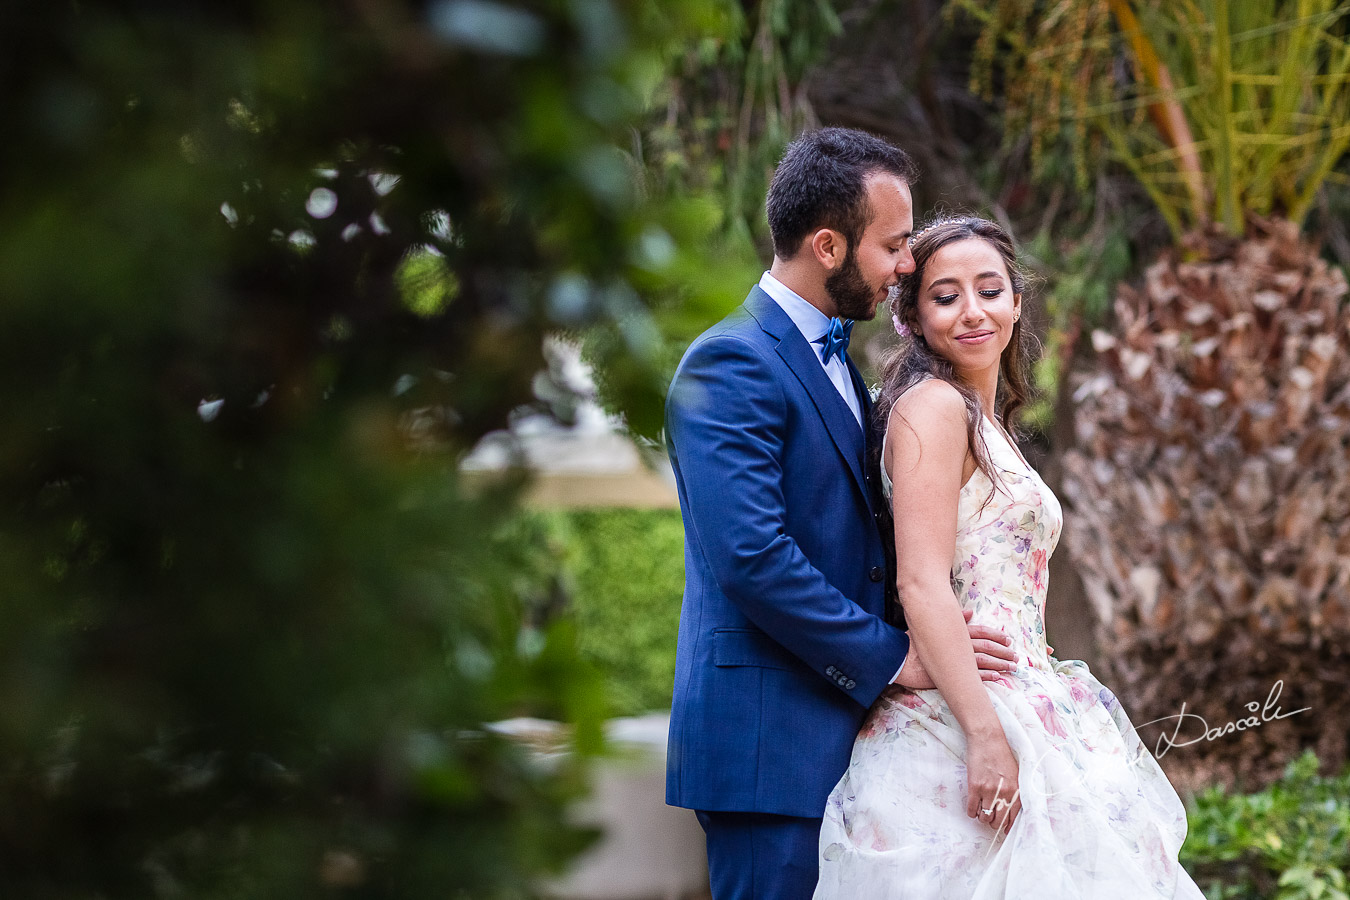 Genuine moments with the bride and groom immediately after the ceremony, as part of an Exclusive Wedding photography at Grand Resort Limassol, captured by Cyprus Wedding Photographer Cristian Dascalu.